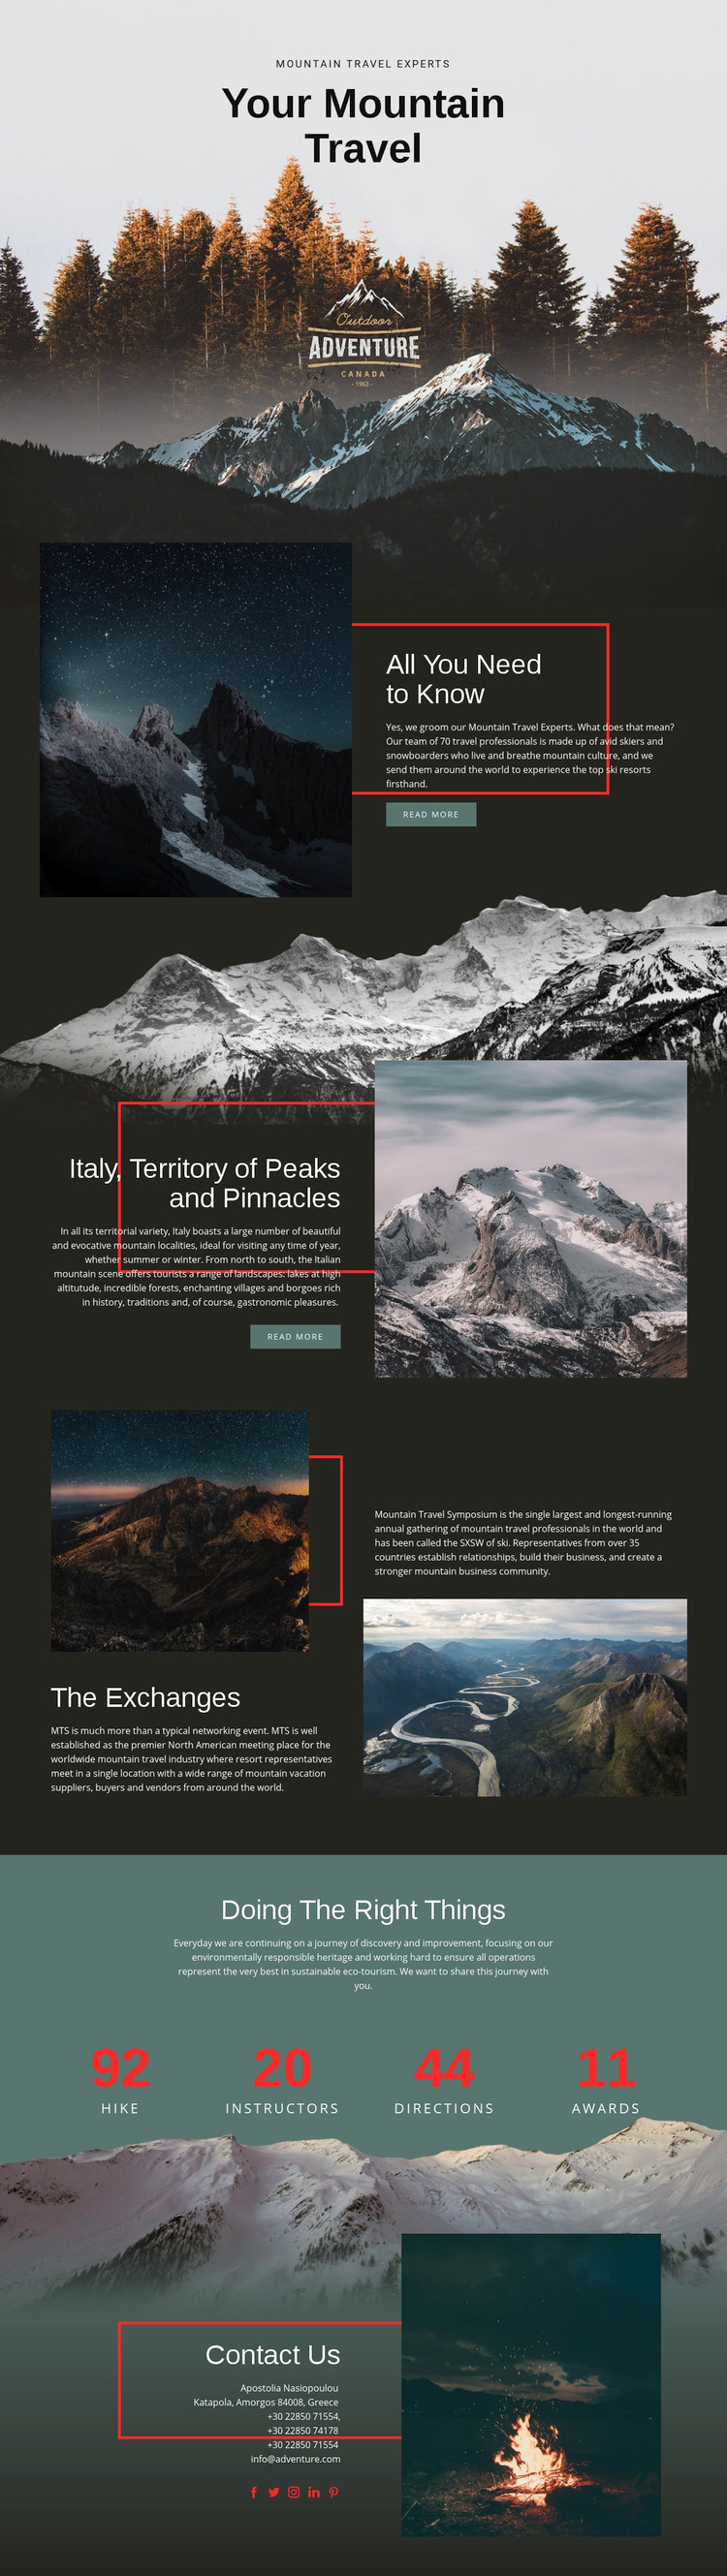 All about mountain travel Elementor Template Alternative